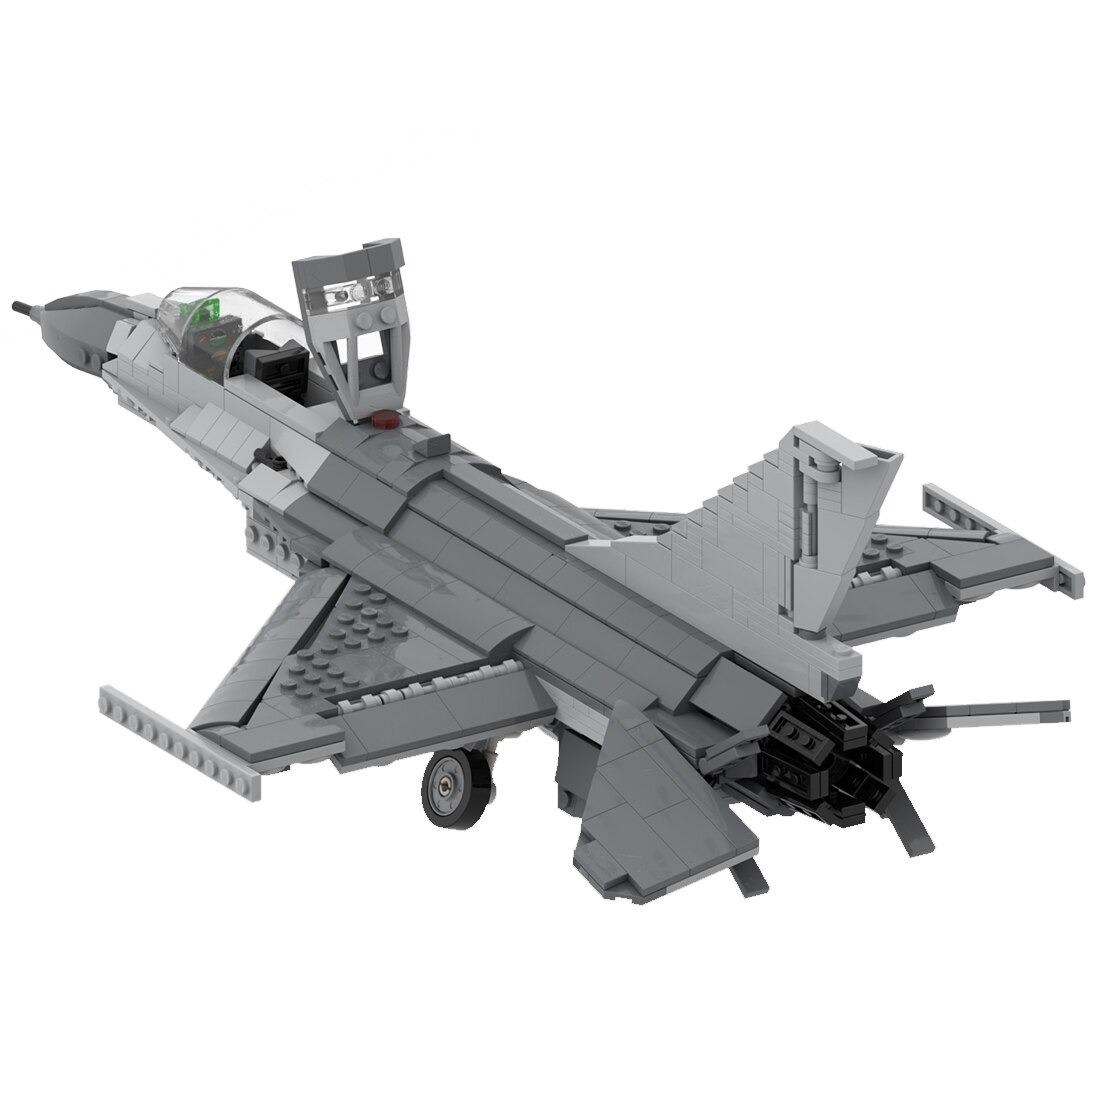 authorized moc 45041 f 16 fighting falco main 2 - MOULD KING